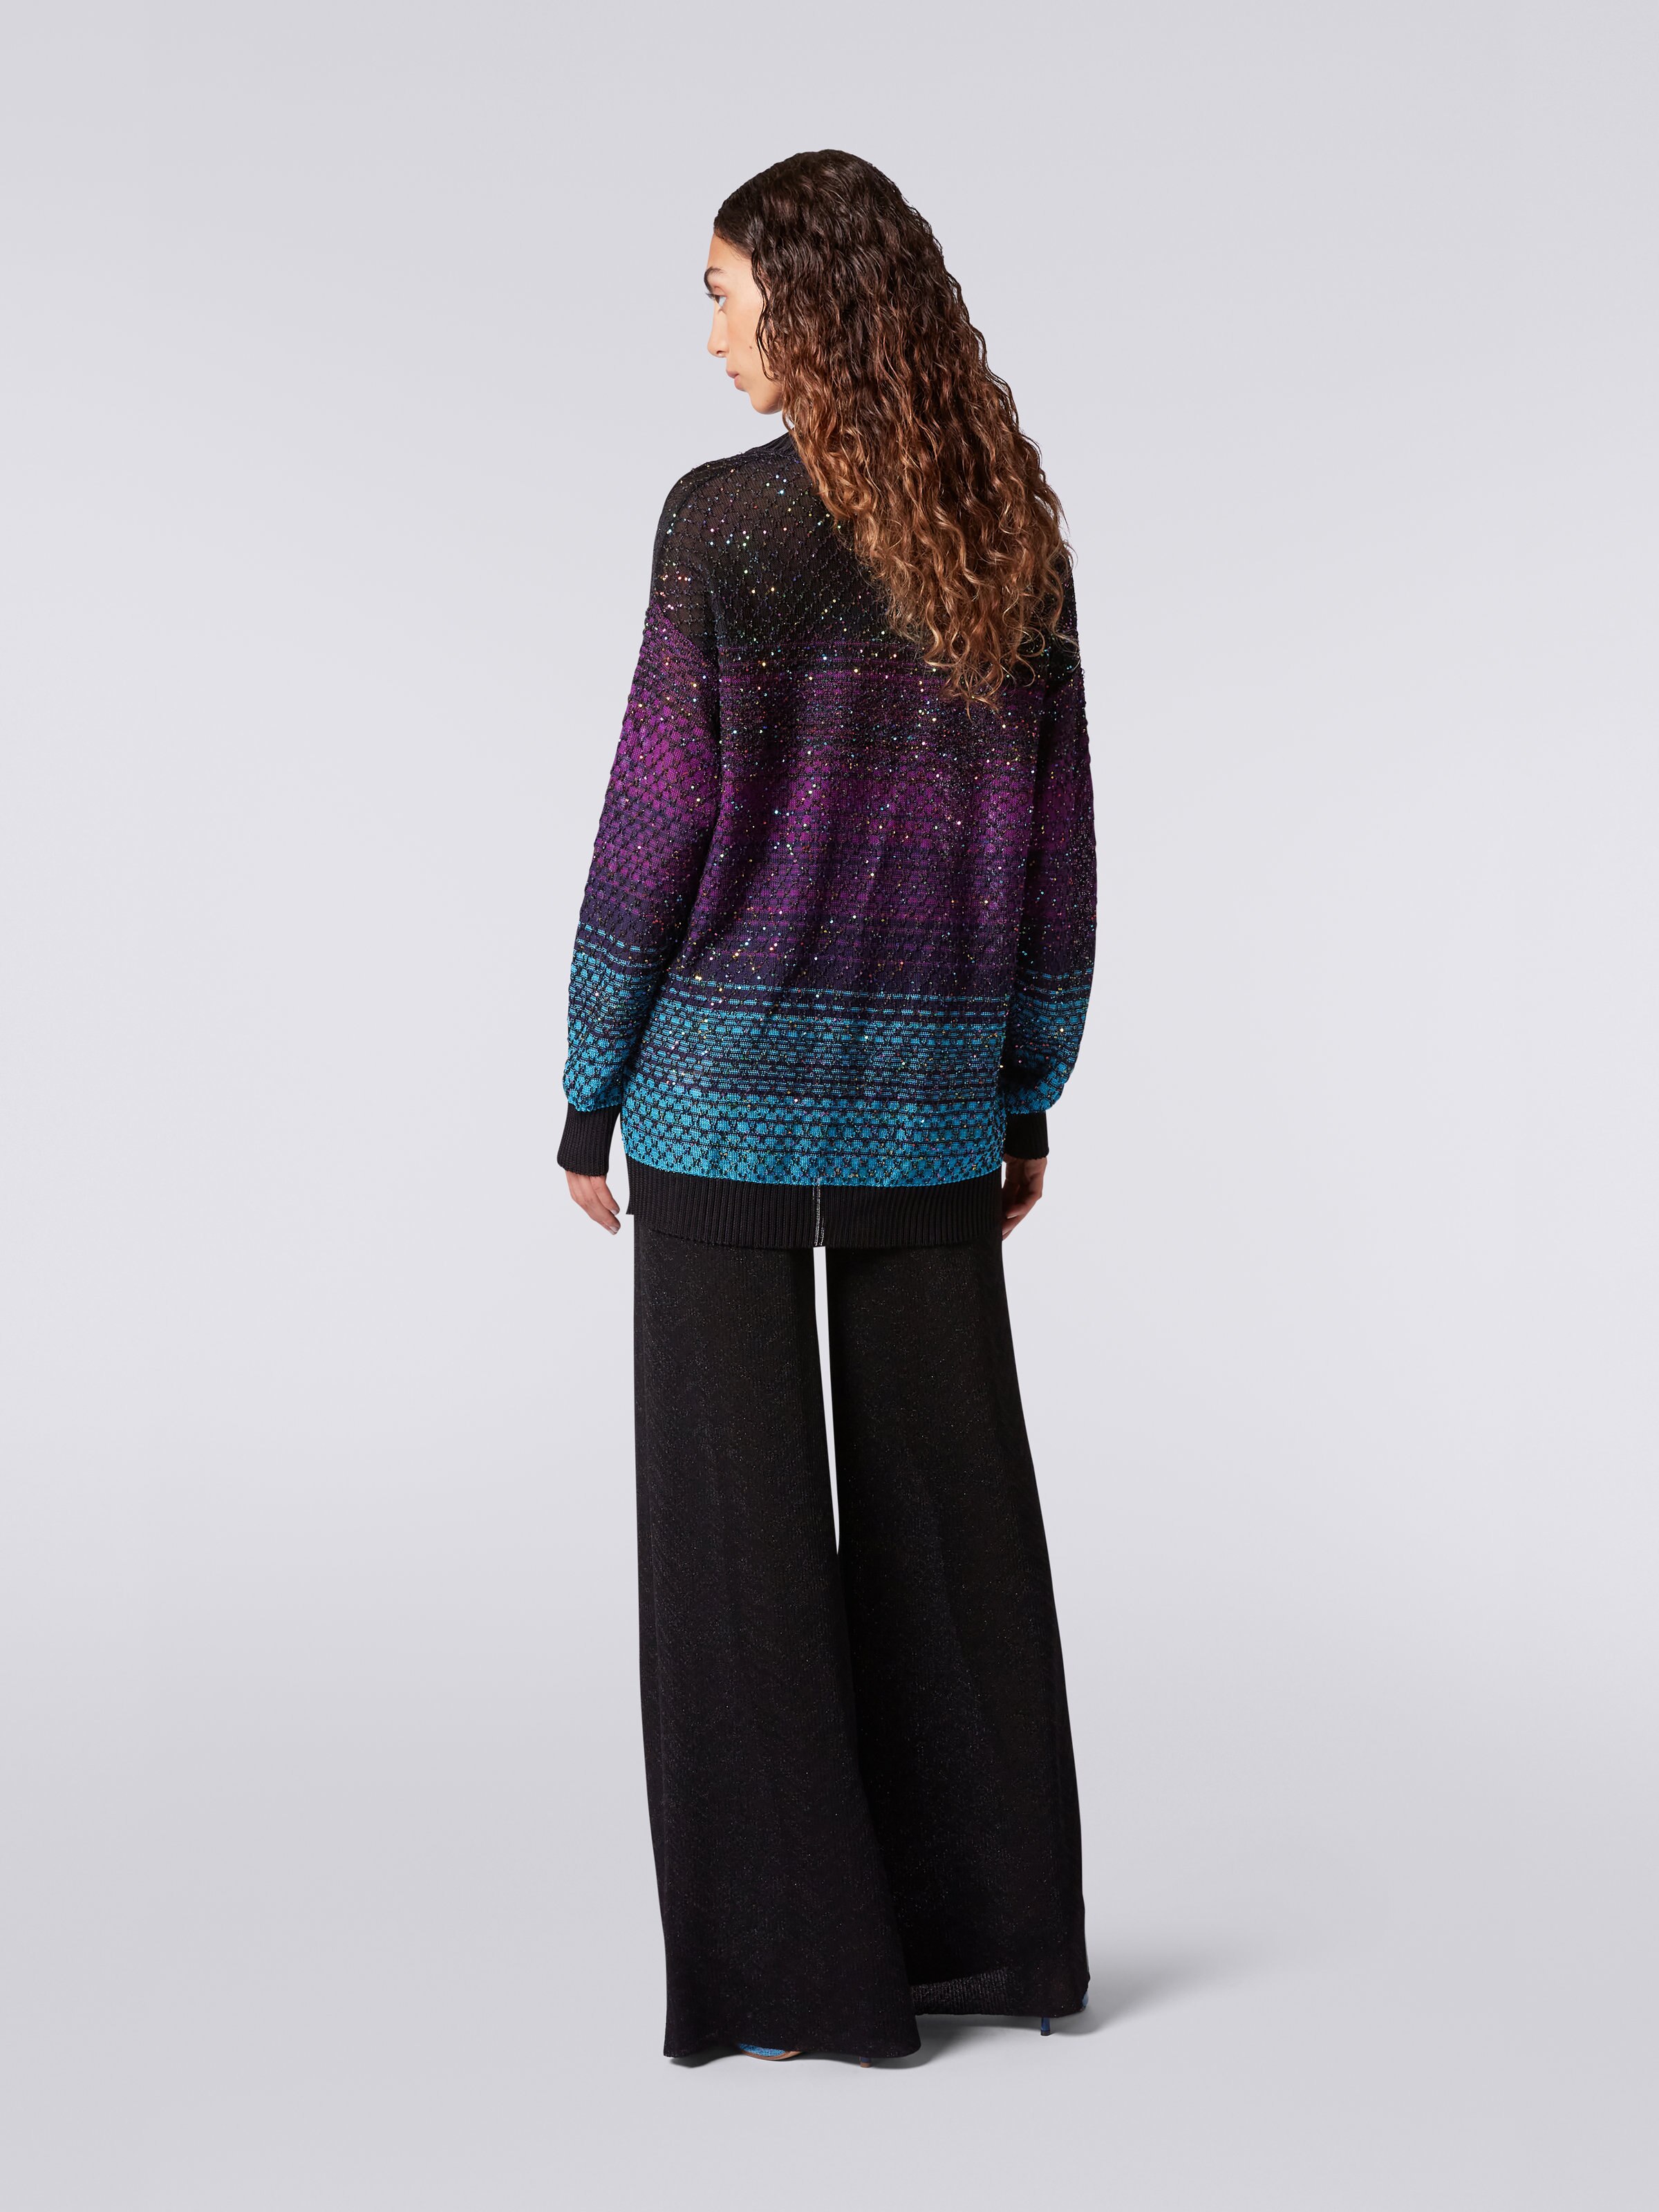 Oversized loose-knit cardigan with sequins, Turquoise, Purple & Black - 3